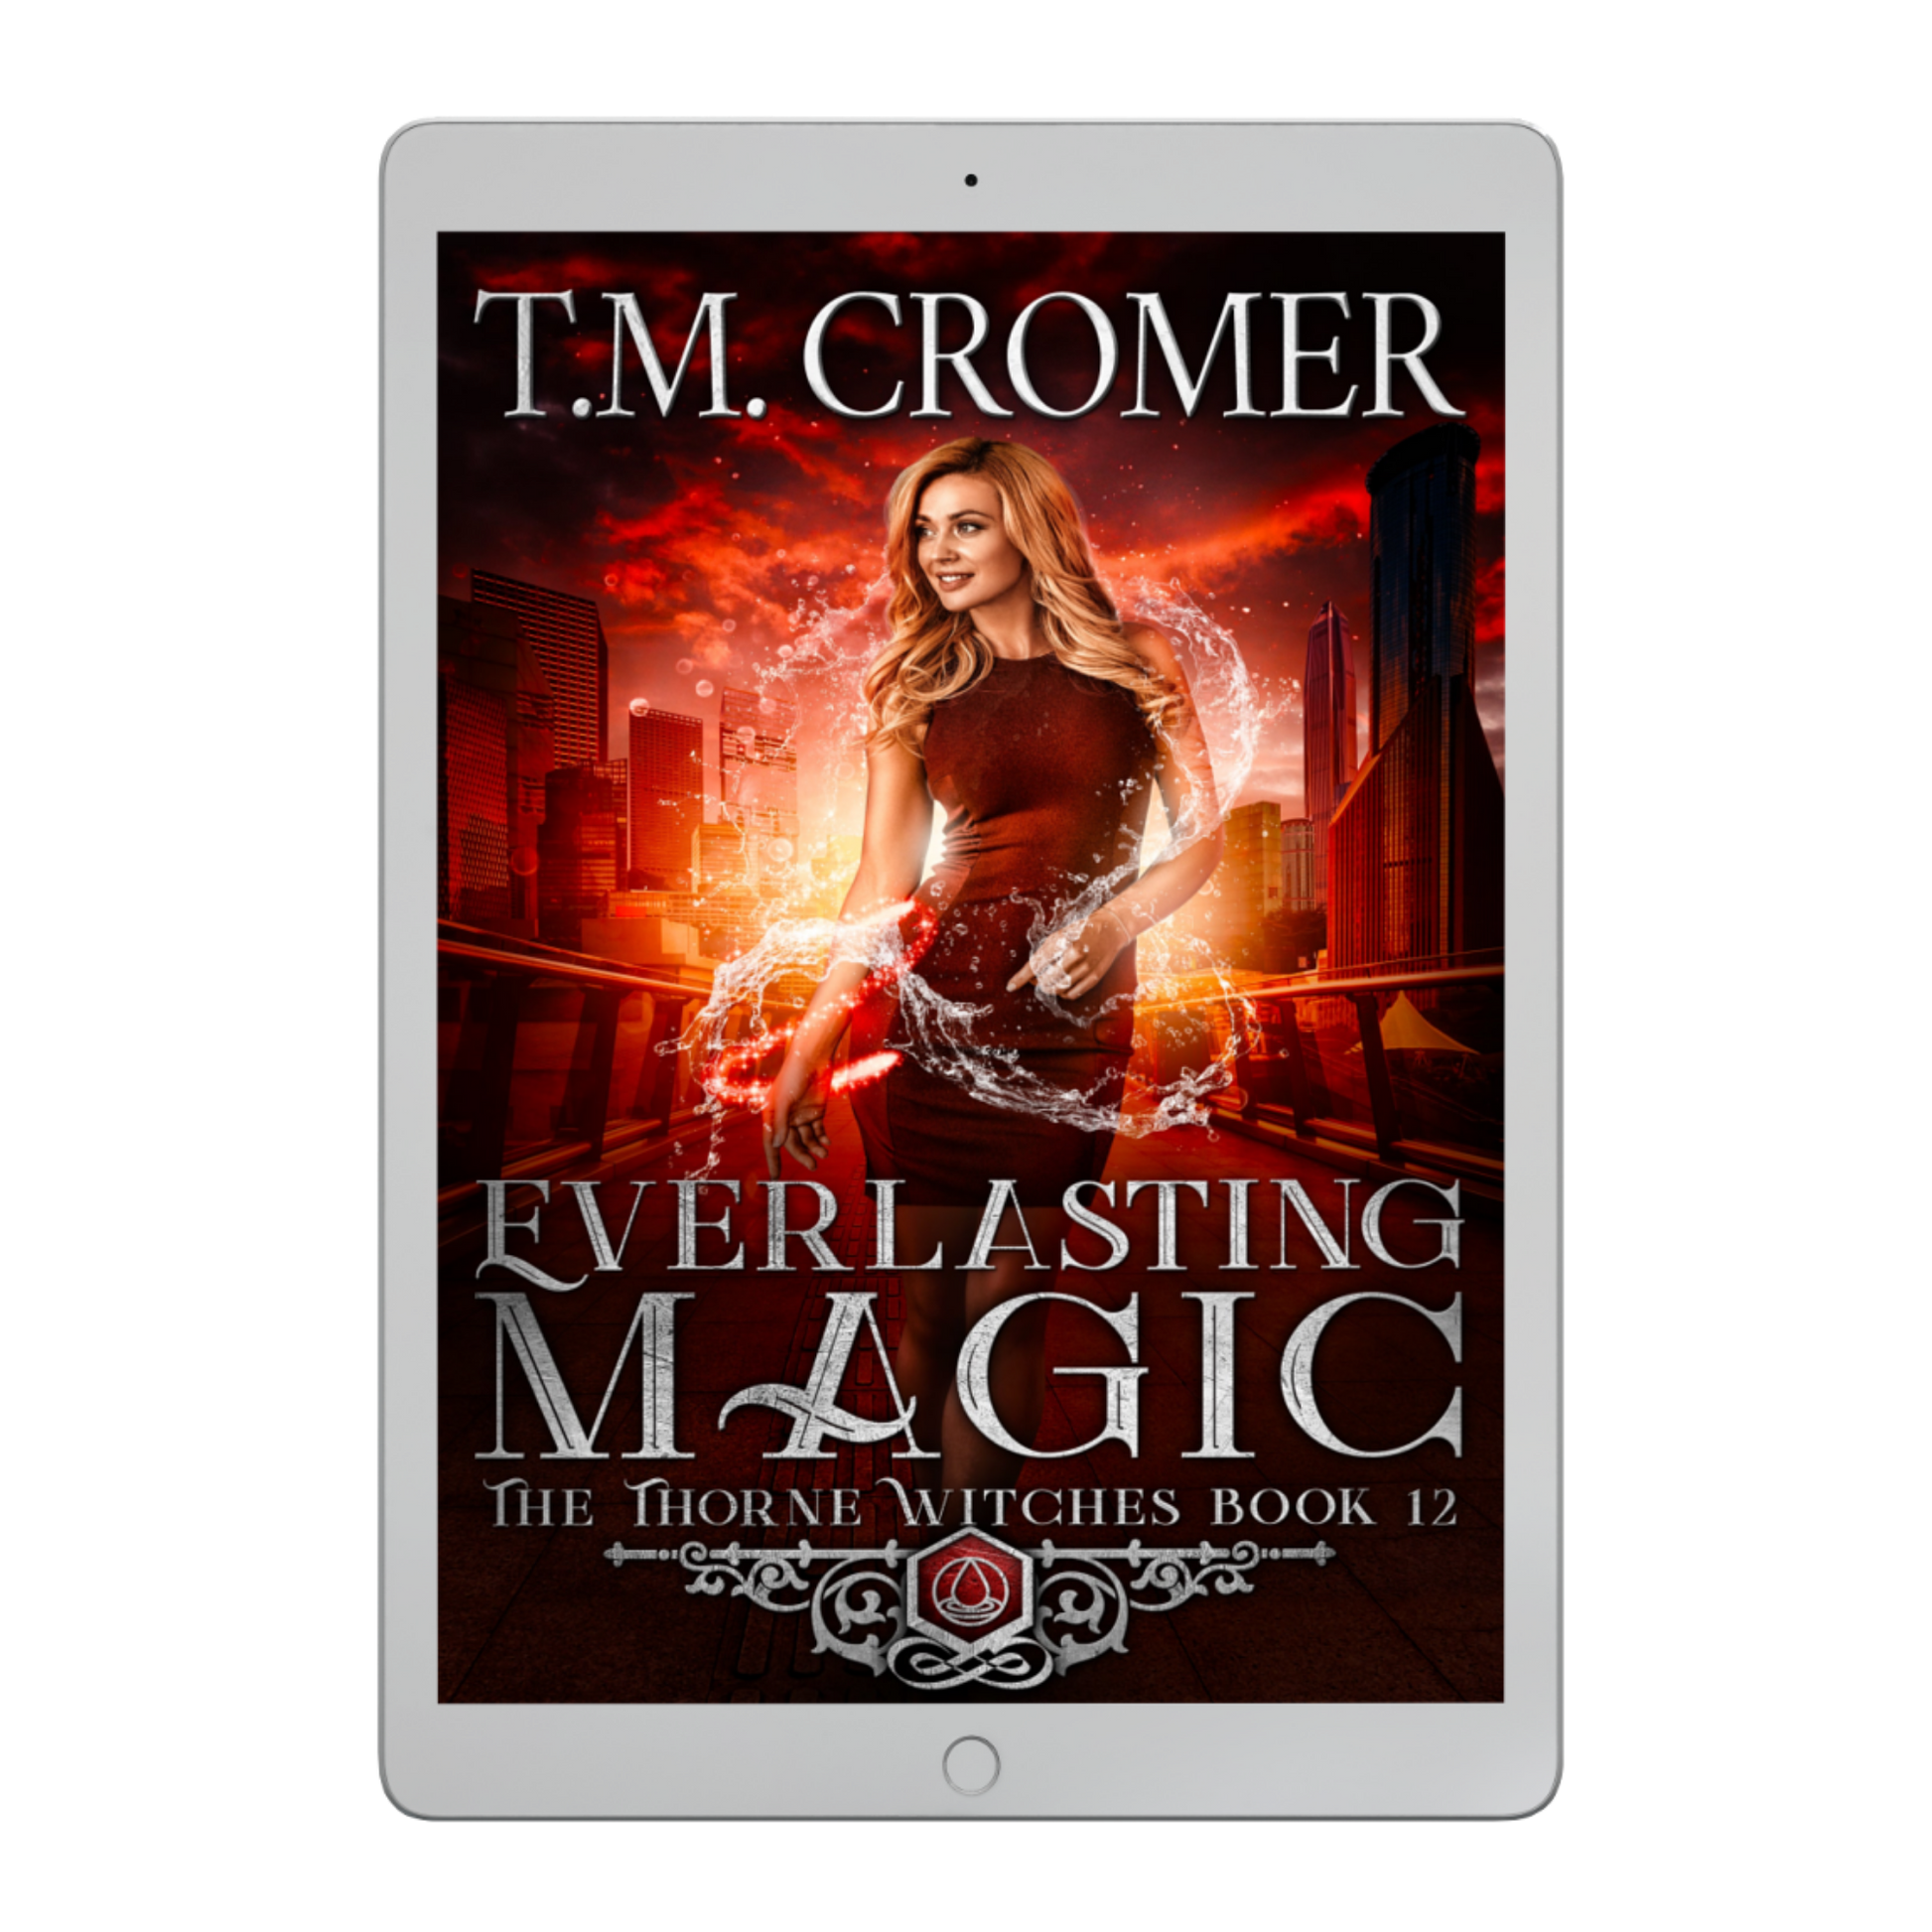 Everlasting Magic Ebook The Thorne Witches #12, Paranormal Romance, Urban Fantasy, Magical Realism